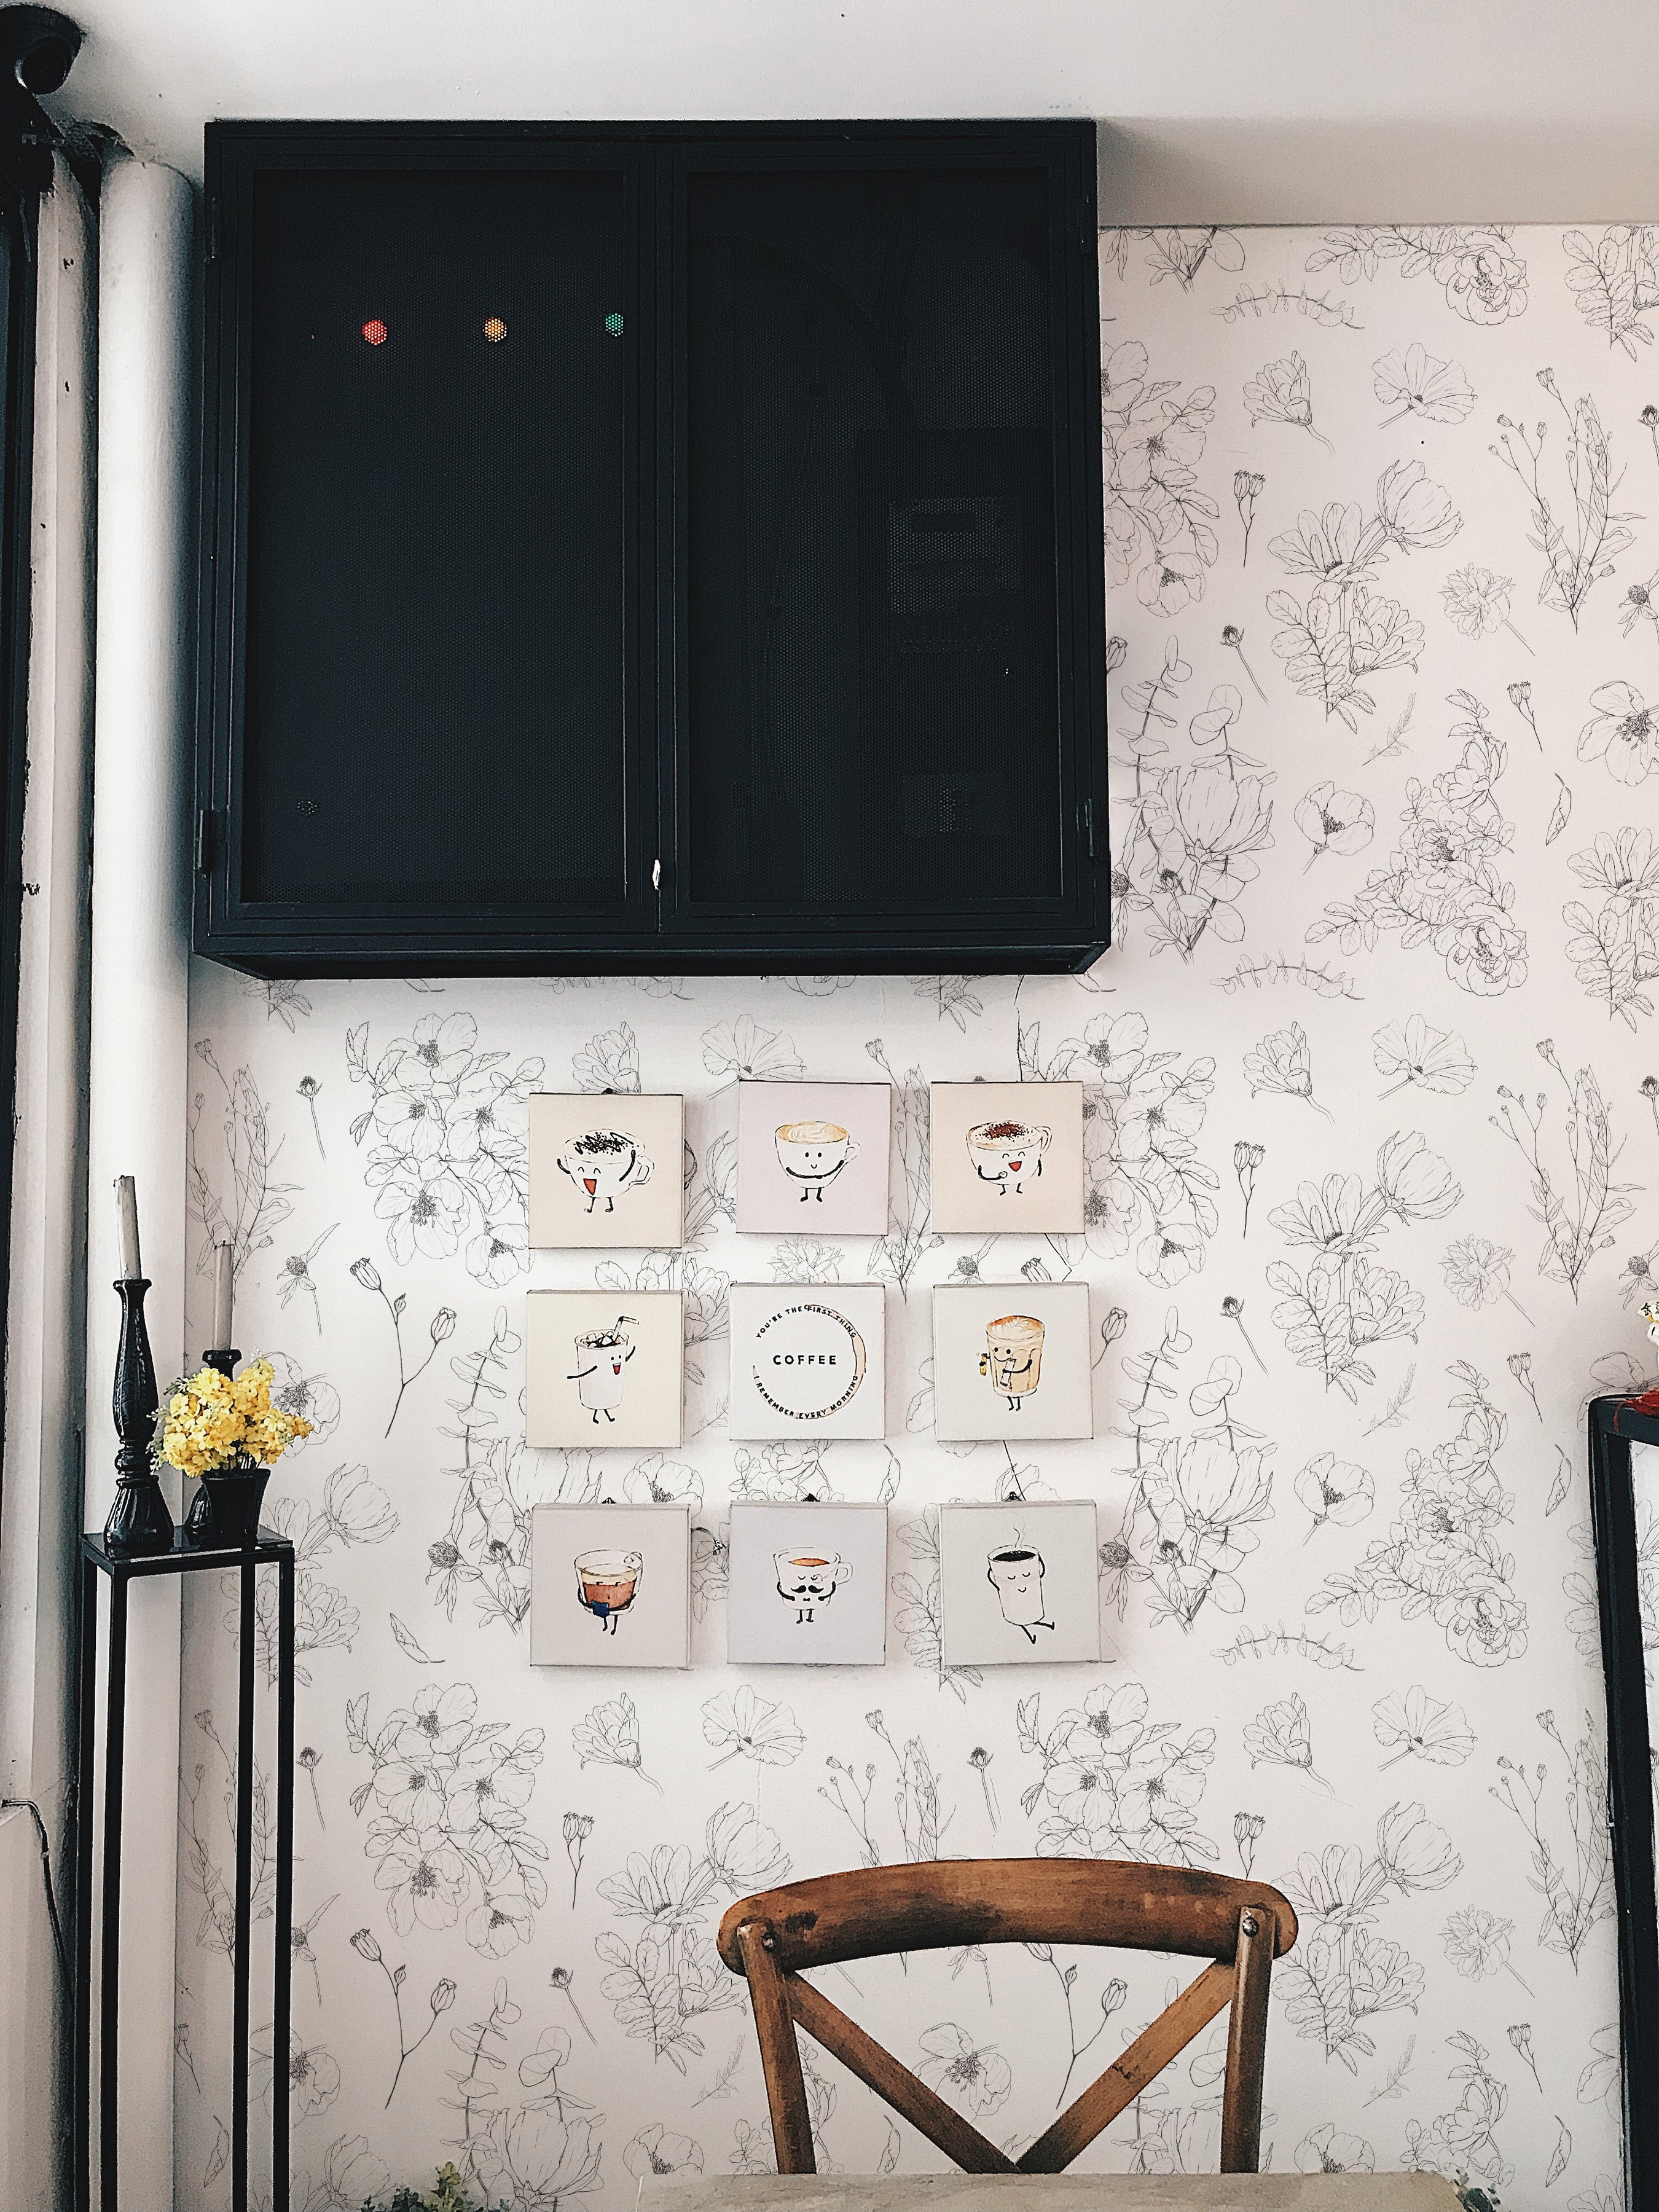 A cozy corner of a room featuring a wooden chair in front of a wall adorned with a floral-patterned wallpaper. The wallpaper showcases a delicate, hand-drawn design of wildflowers in black sketch-like strokes on an off-white background. Above the chair hangs a series of small framed illustrations of coffee cups with whimsical faces. To the left, a tall black pedestal holds a vase with yellow flowers, enhancing the room's botanical theme.